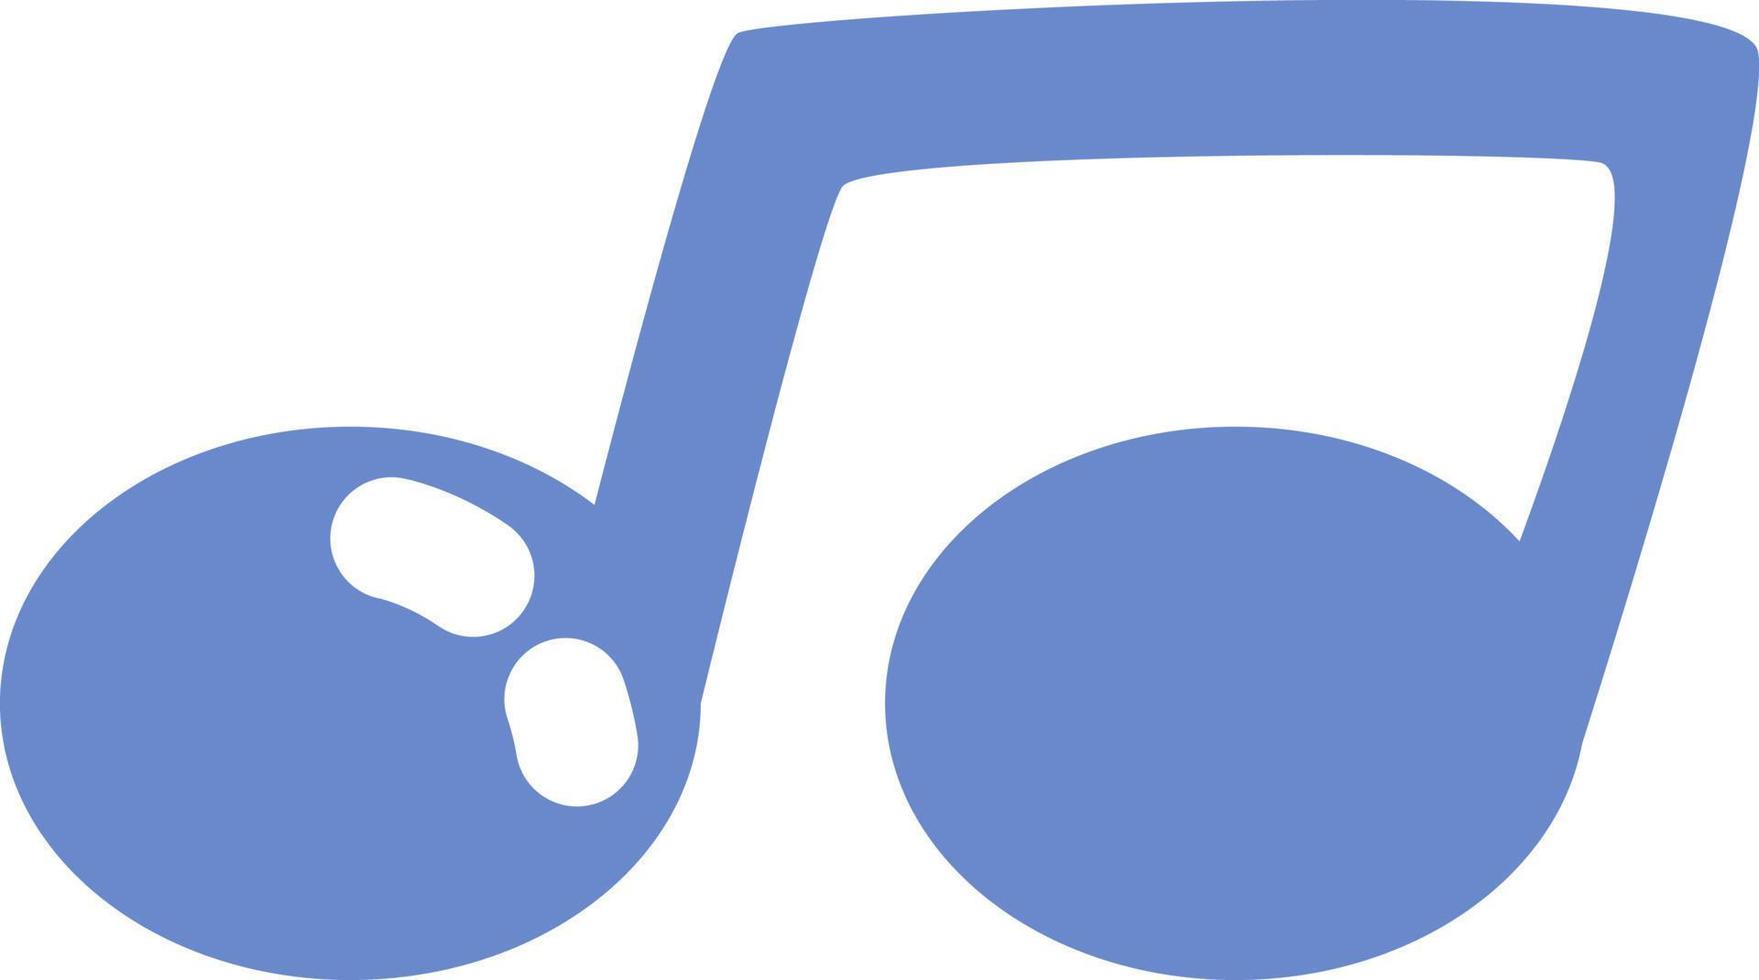 Cinema music note, illustration, vector on a white background.